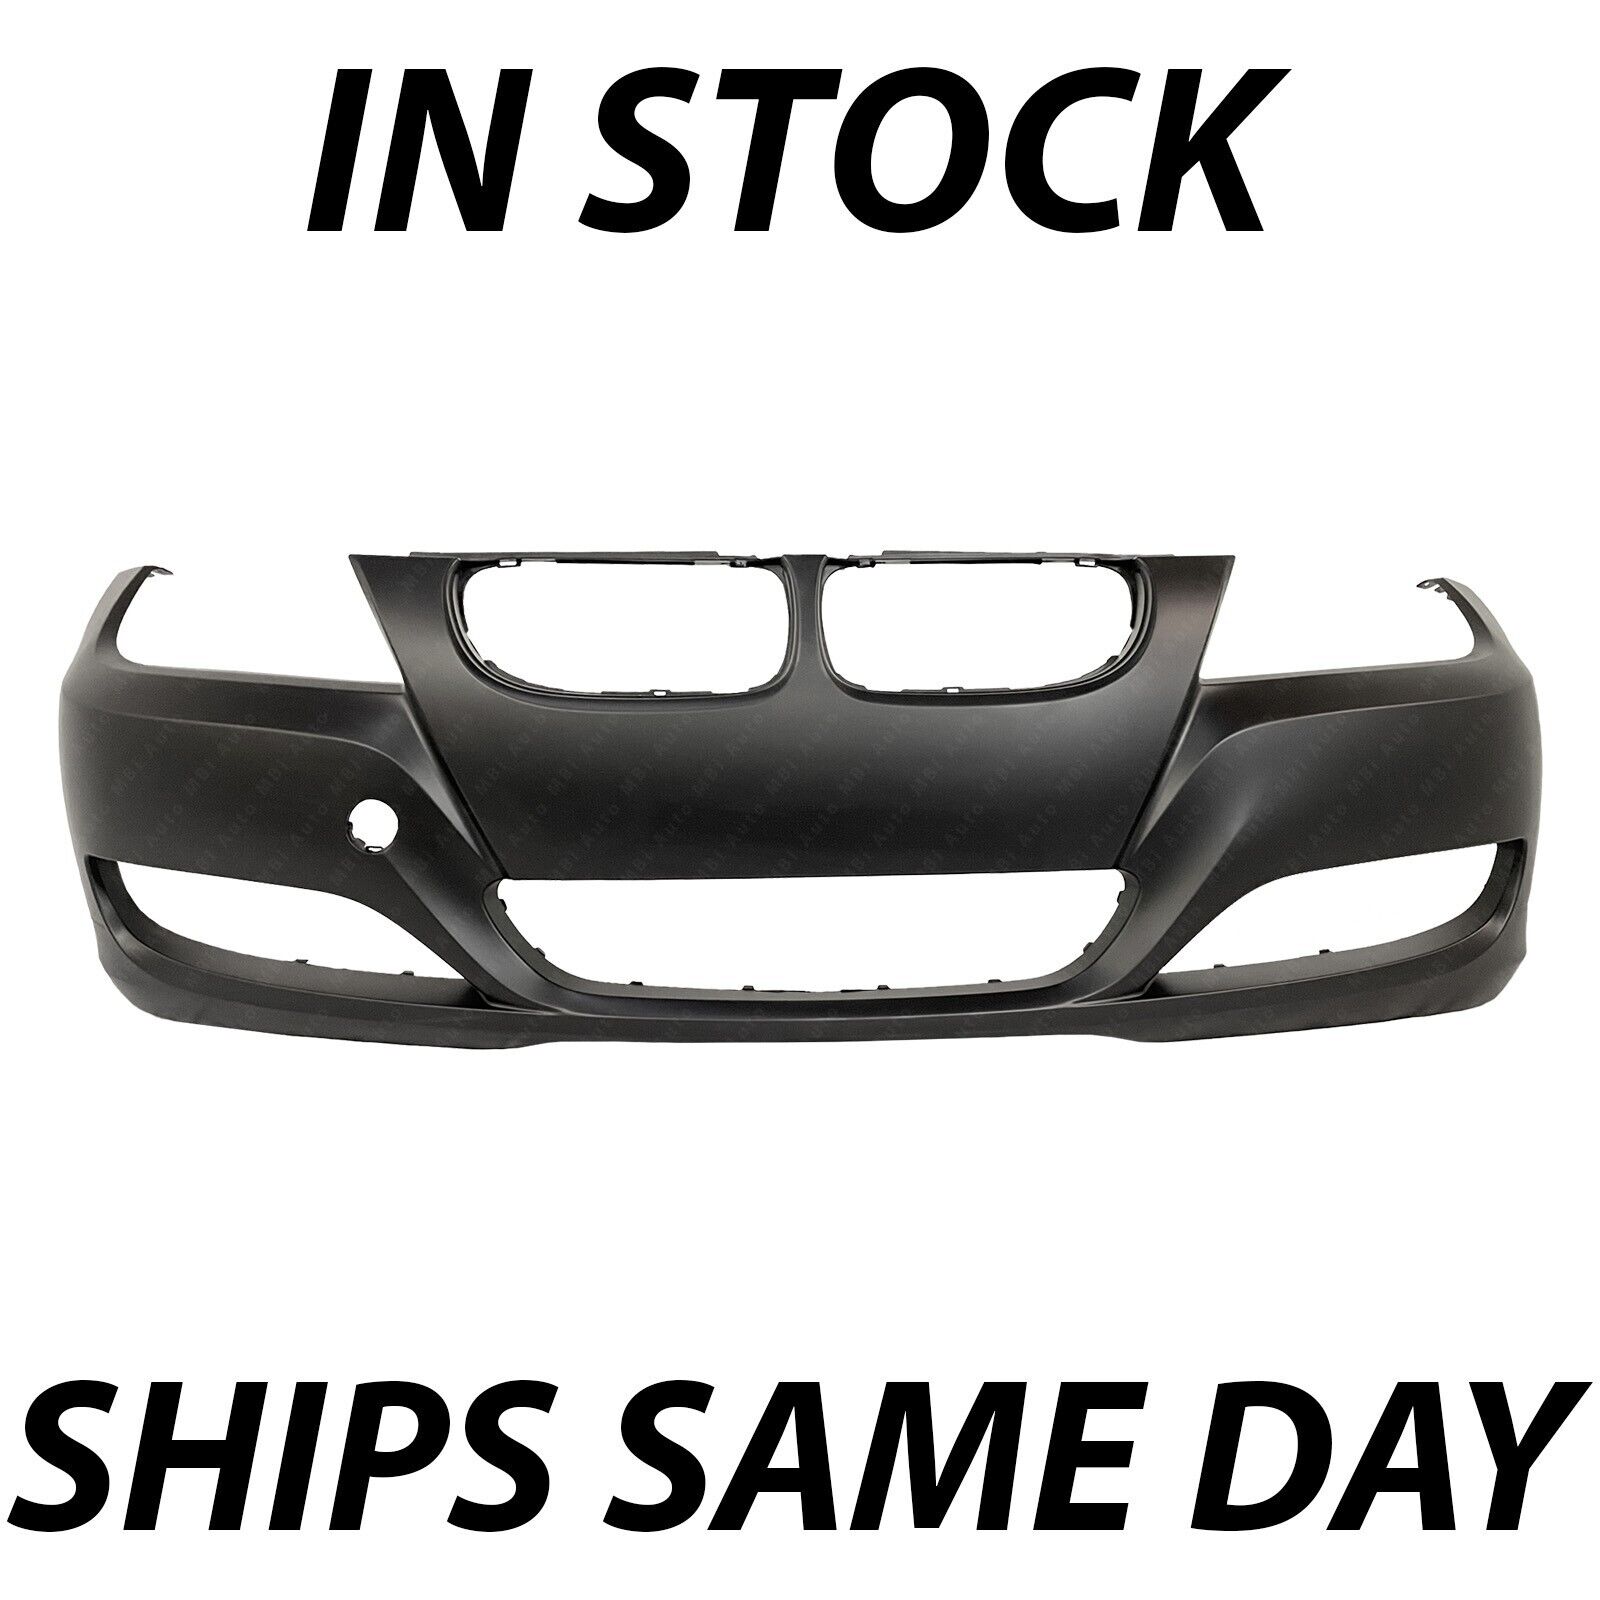 NEW Primered Front Bumper Cover Fascia for 2009-2012 BMW 3-Series Sedan / Wagon